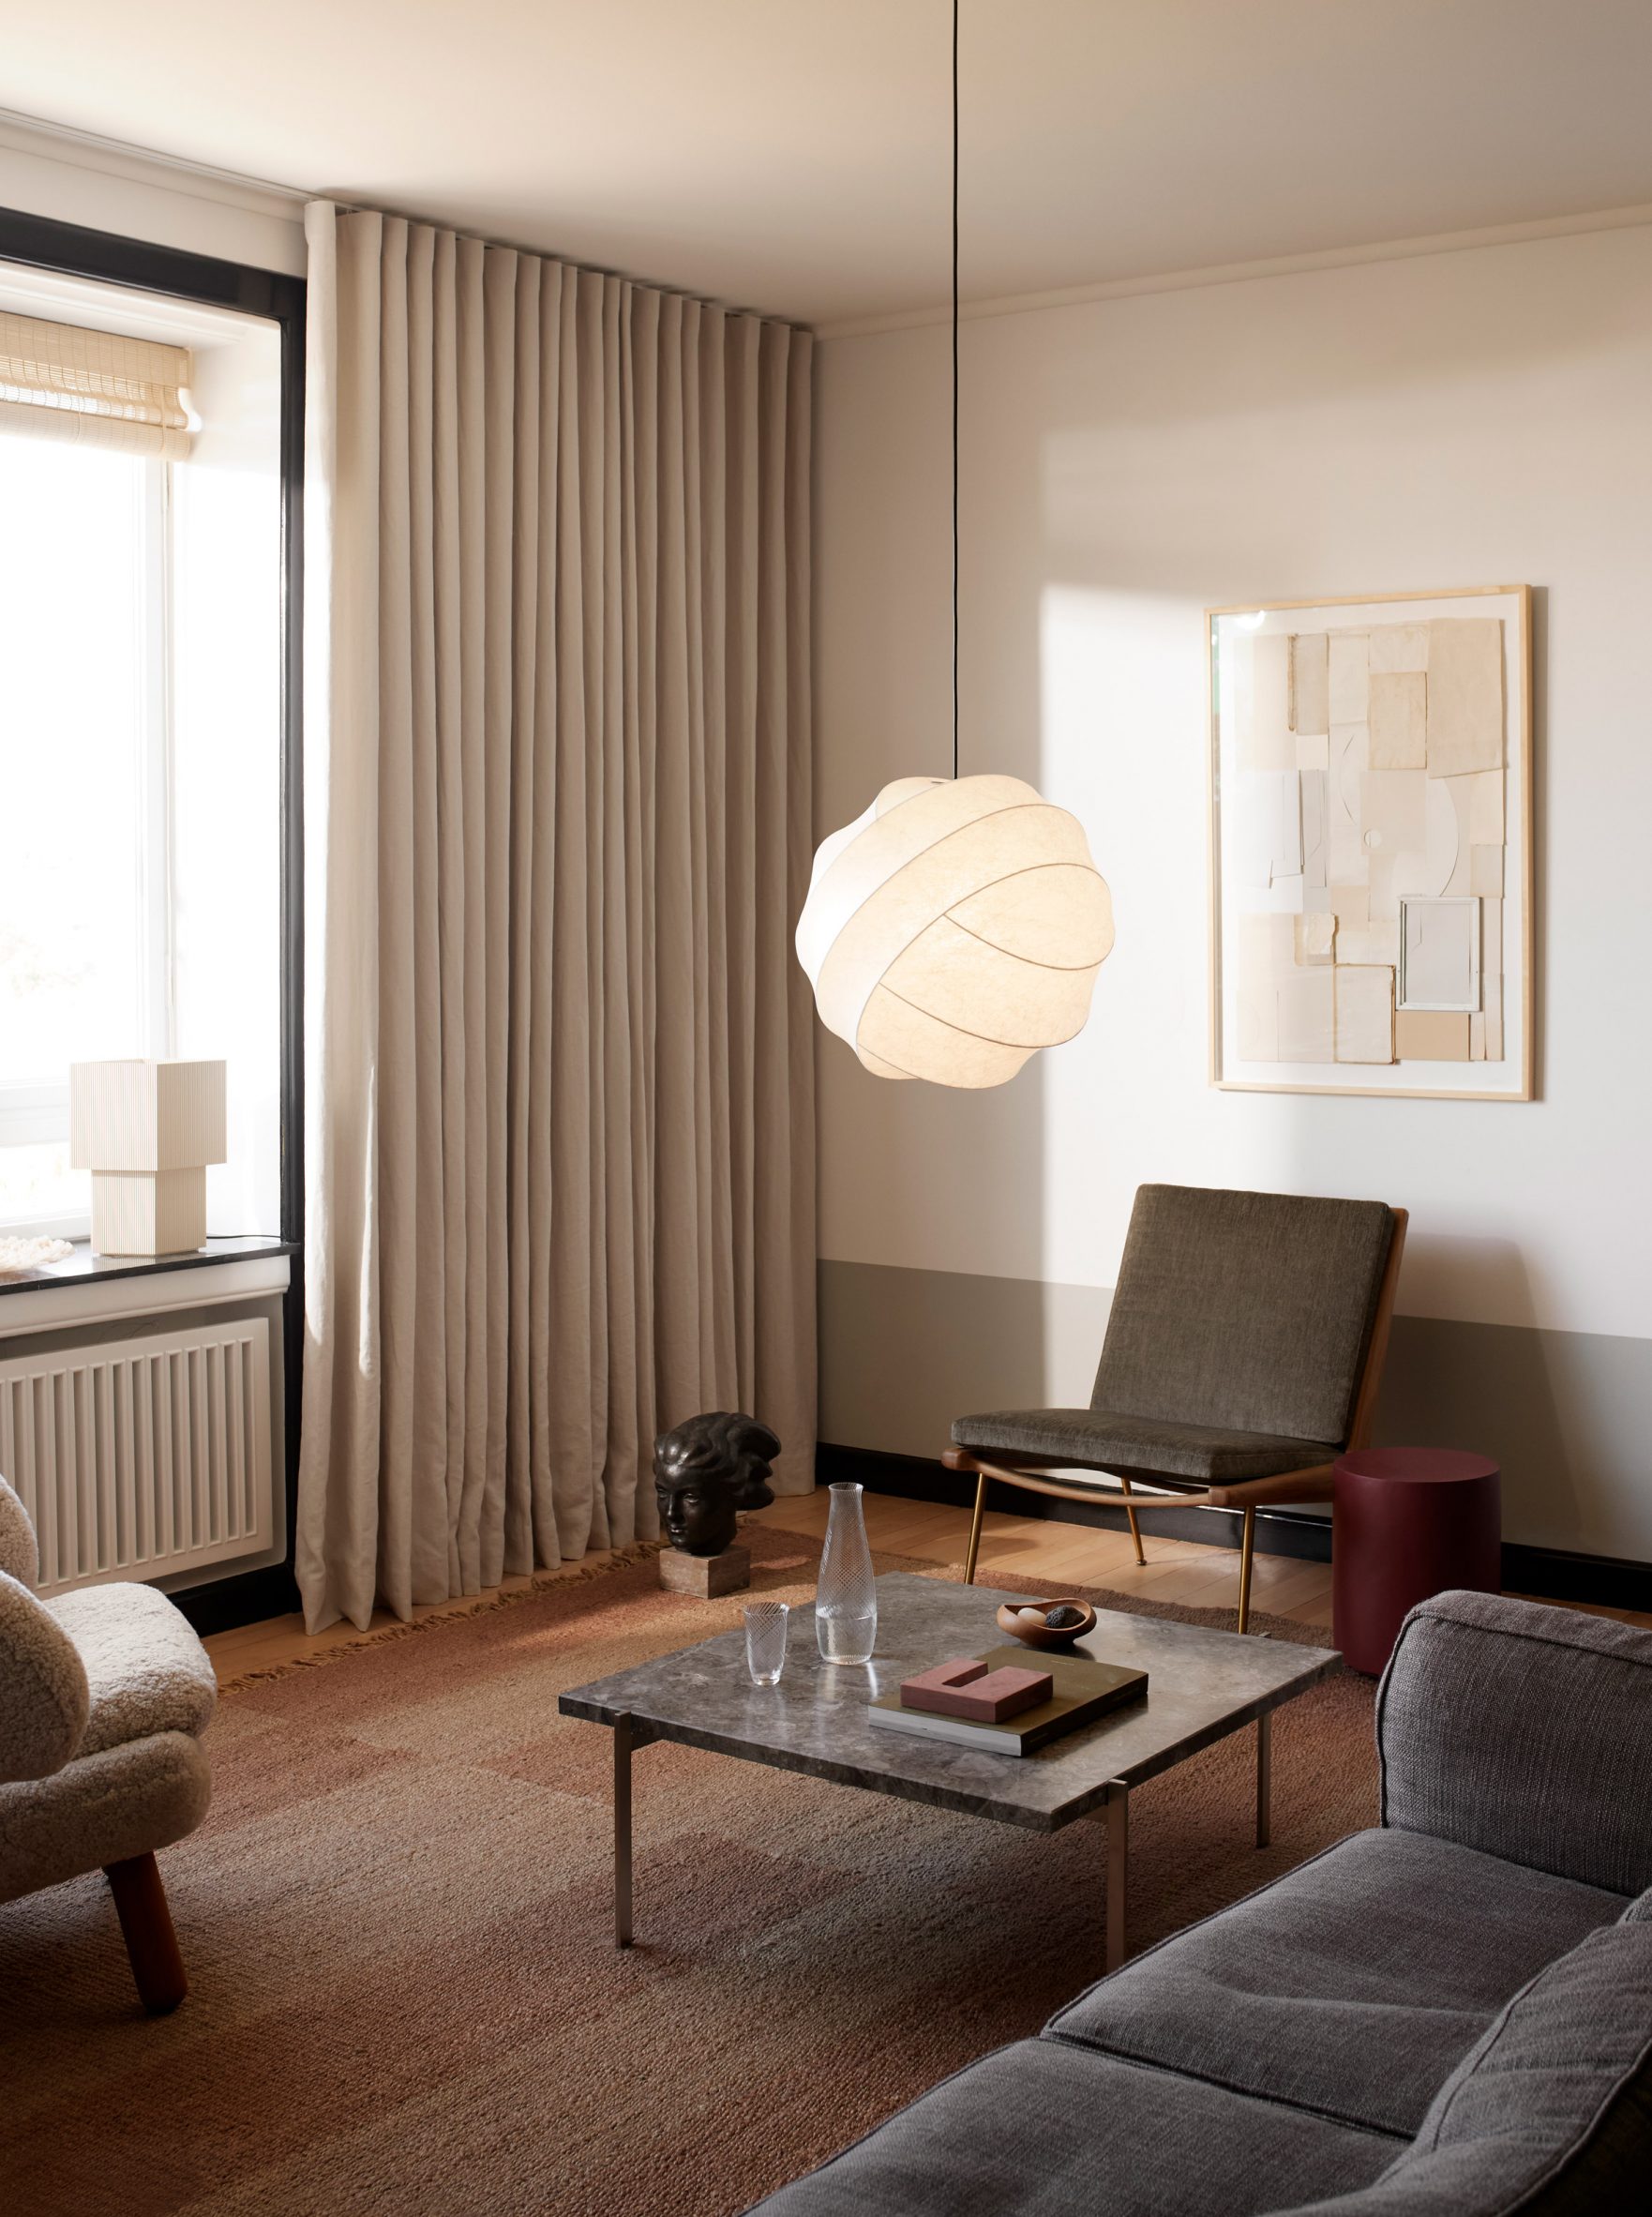 A white light in a grey living room interior